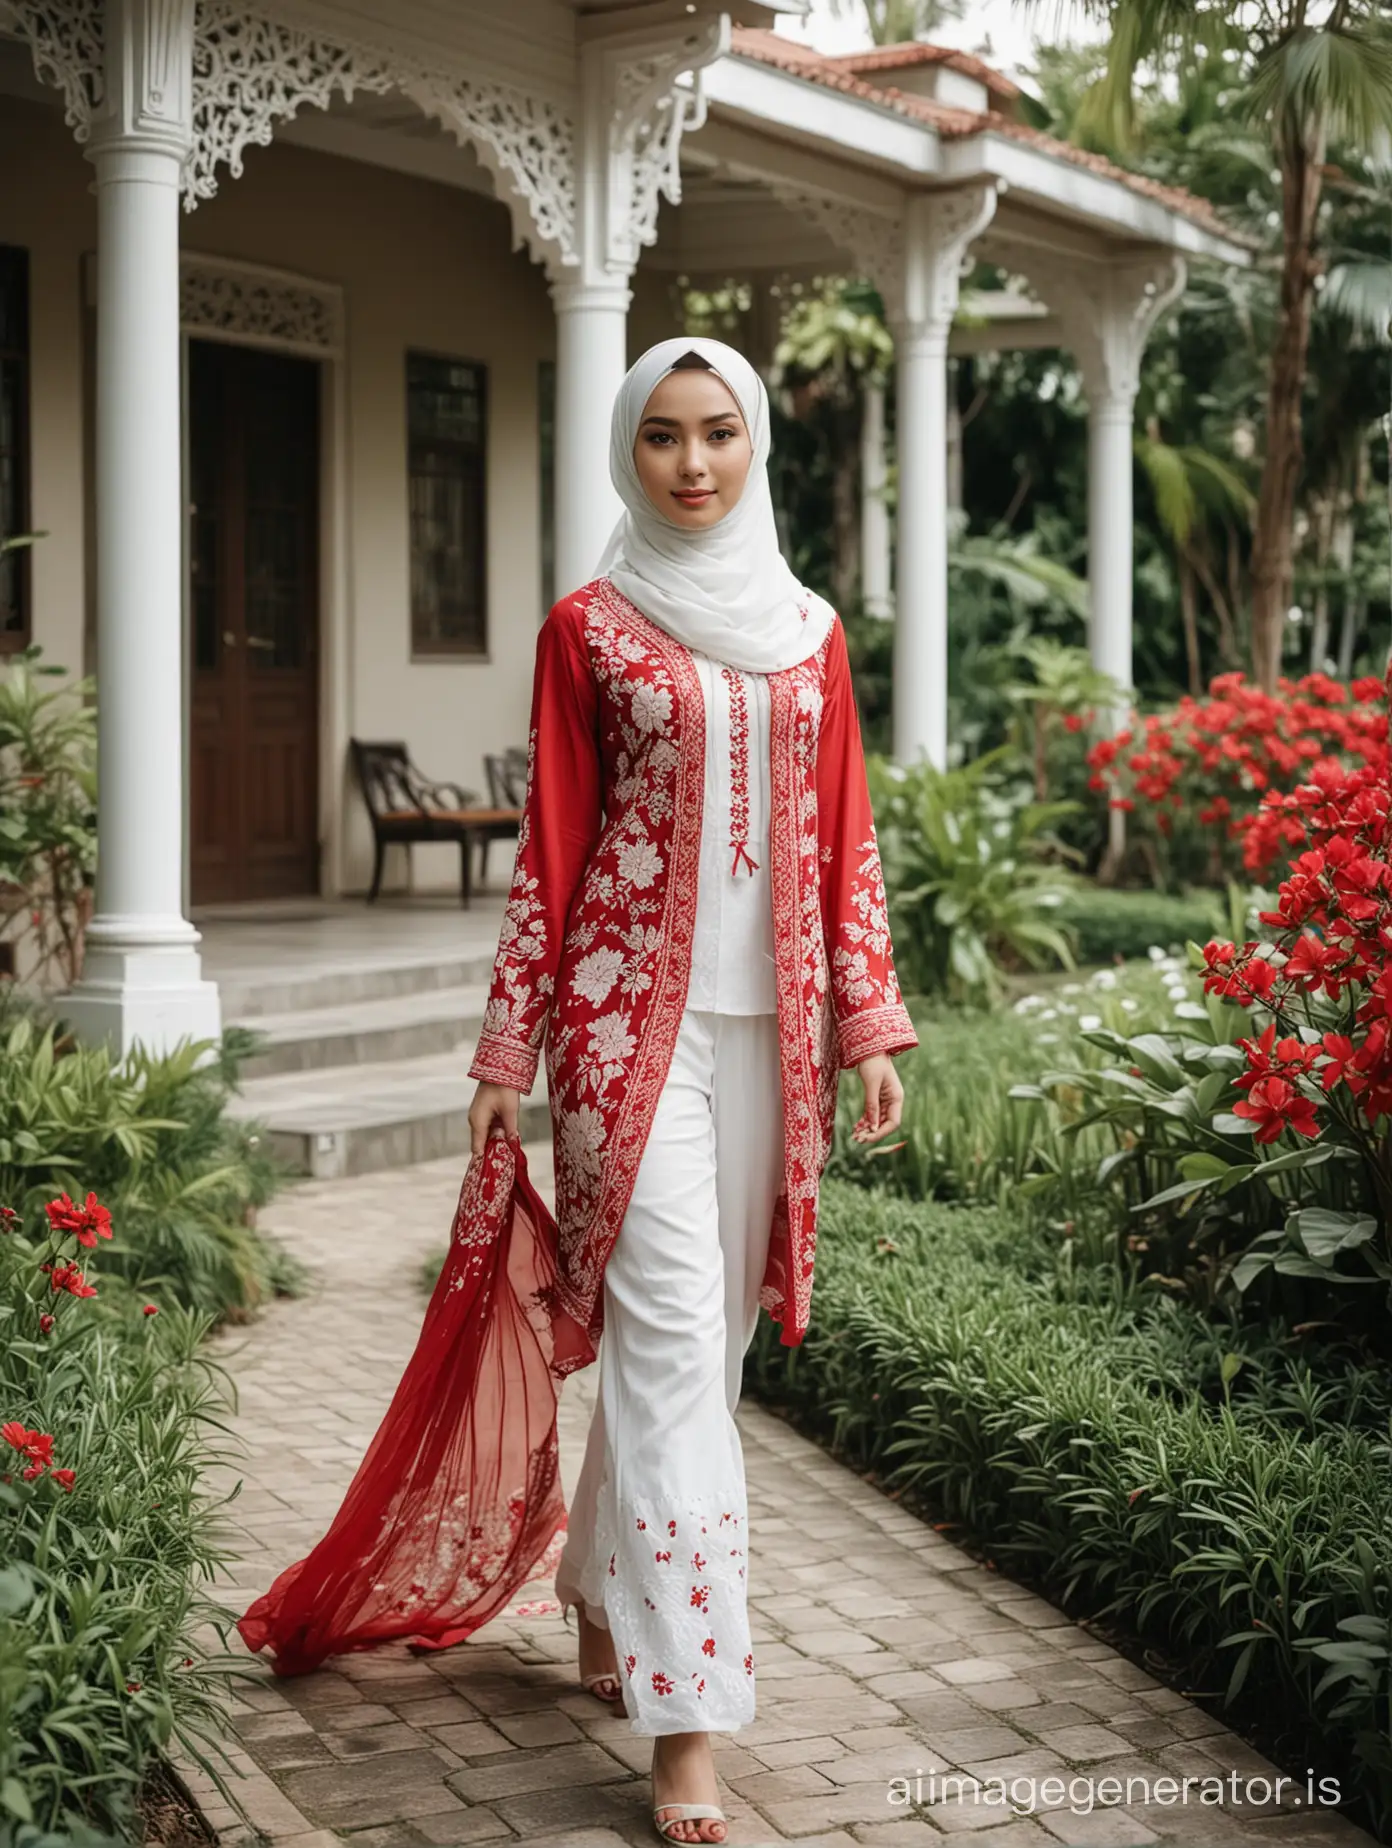 A beautiful girl with a hijab, smooth white skin, red and white kebaya walking on the garden of a beautiful house